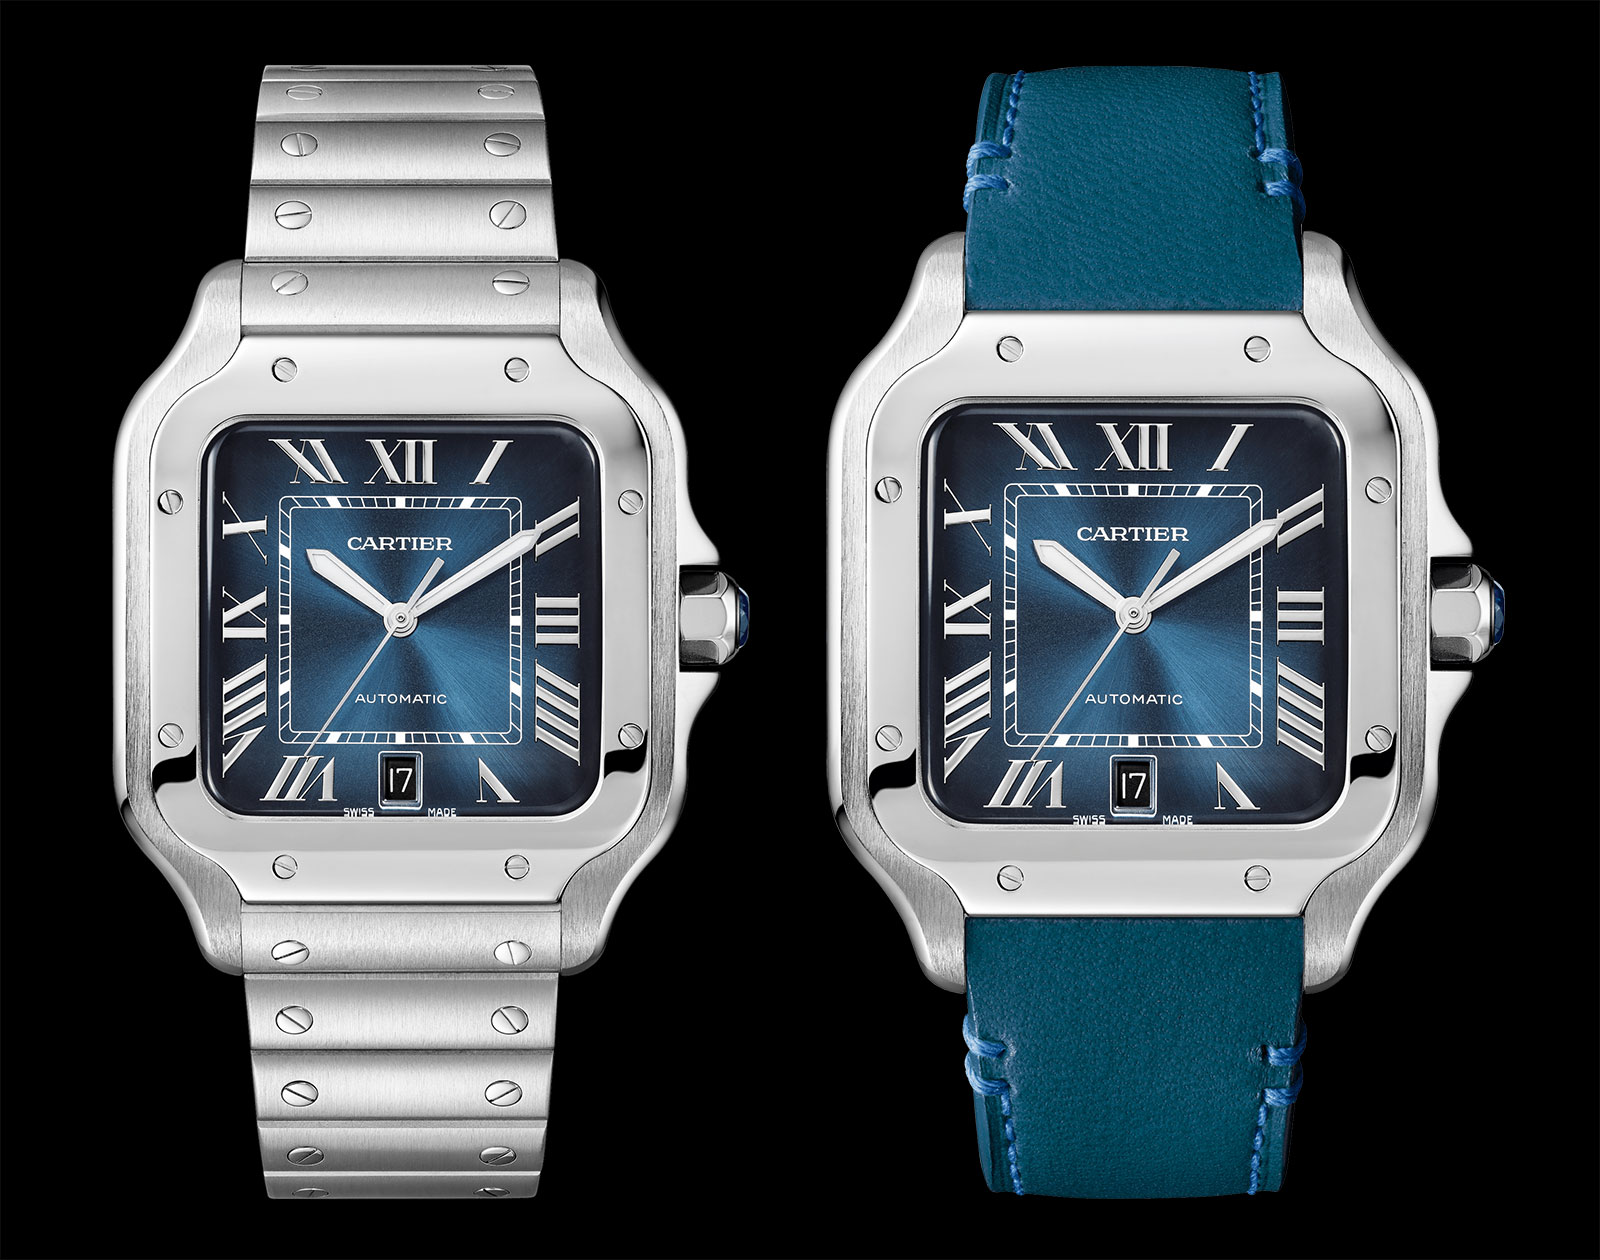 Even Before SIHH Starts One Thing Is Clear: Blue Remains The New Black!